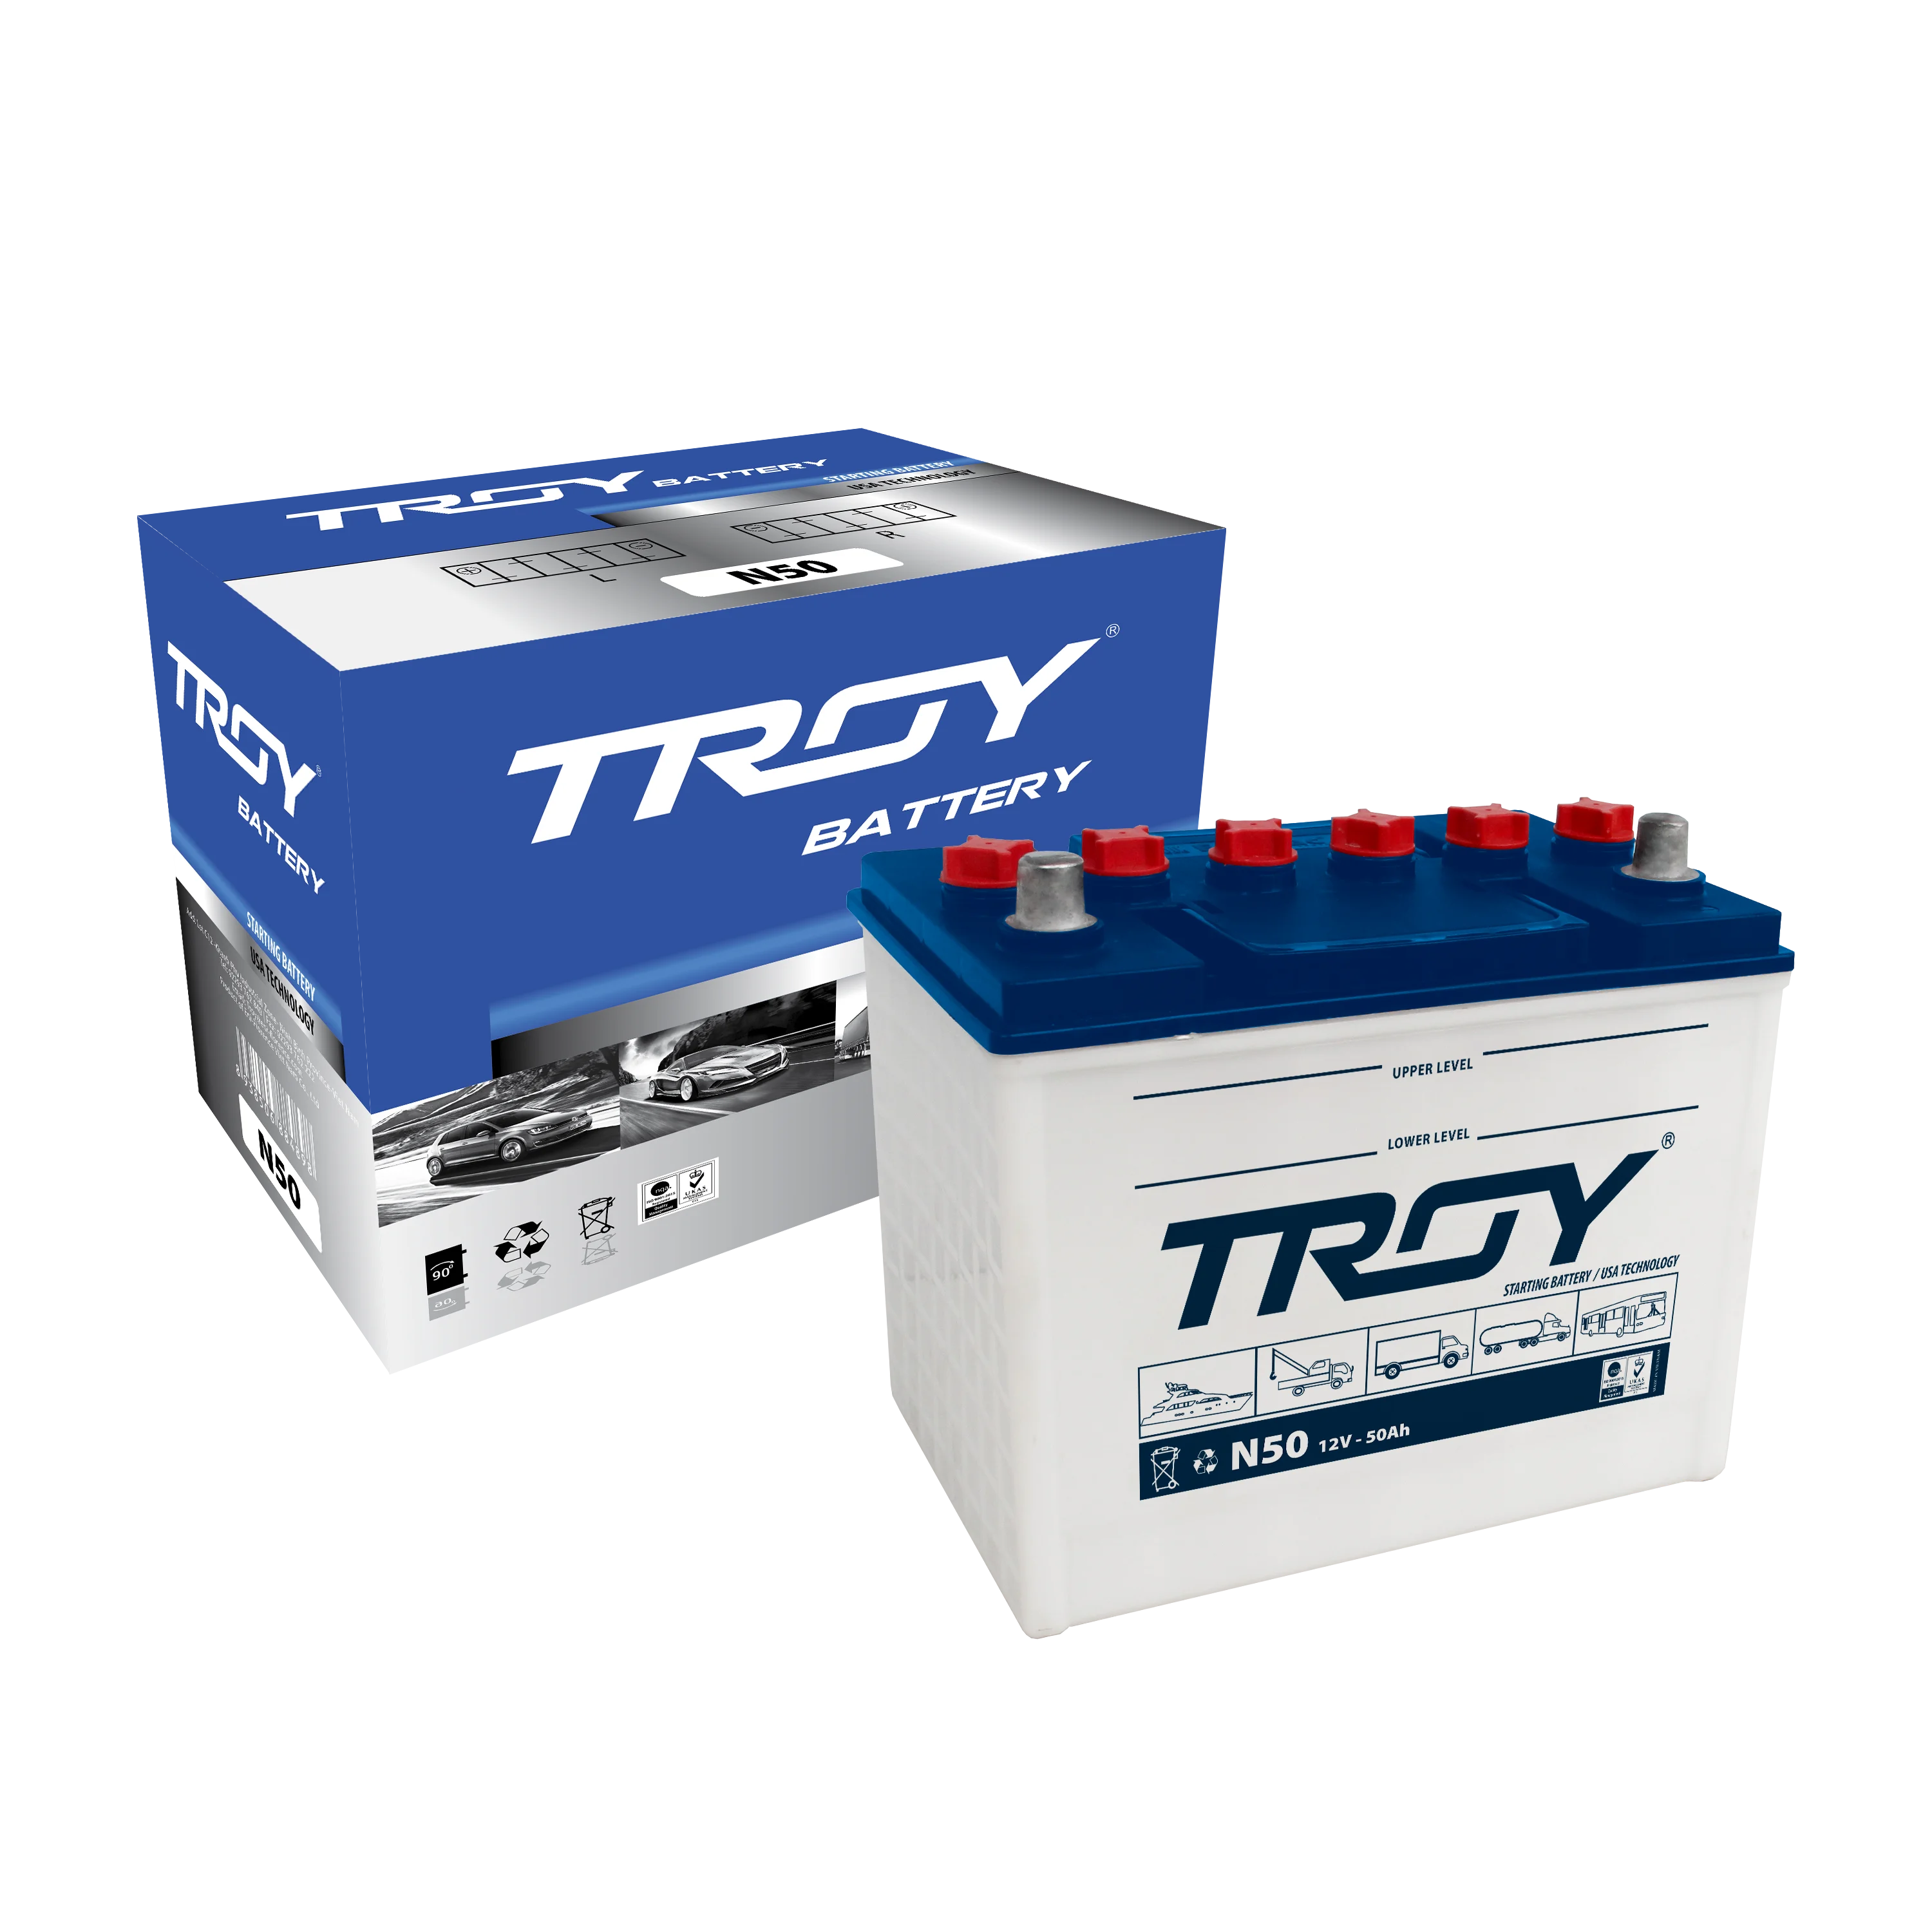 Car Battery Made In Vietnam N50 12v 50 Ah Powerful Auto Batteries Troy Brand For Sale With High Quality - Buy Car Best Car Brands Auto Batteries,Car Batteries For Sale